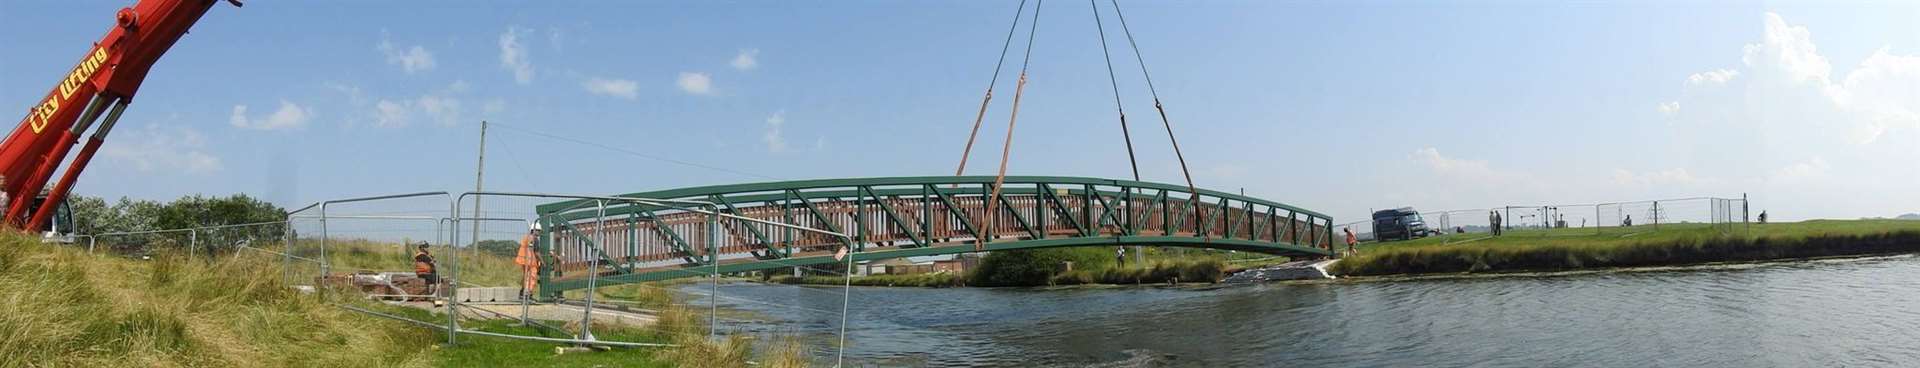 The new £105,000 metal footbridge is gently lowered into position at Barton's Point Coastal Park, Sheerness, Sheppey. Picture: Adam Young of Swale Weather